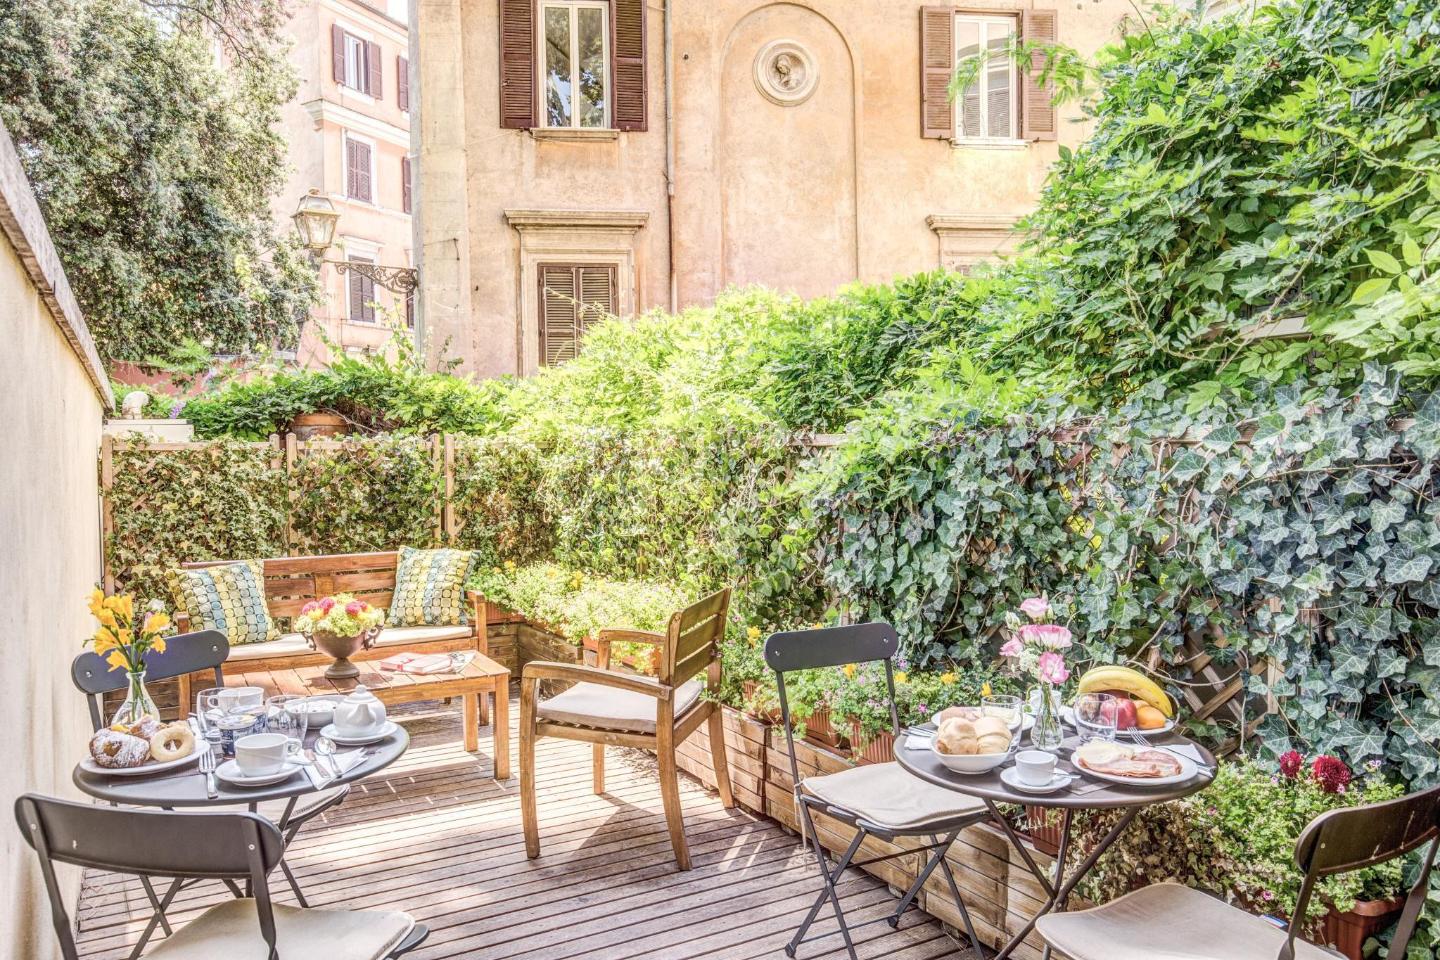 The 10 best B&Bs in Rome, Italy | Booking.com